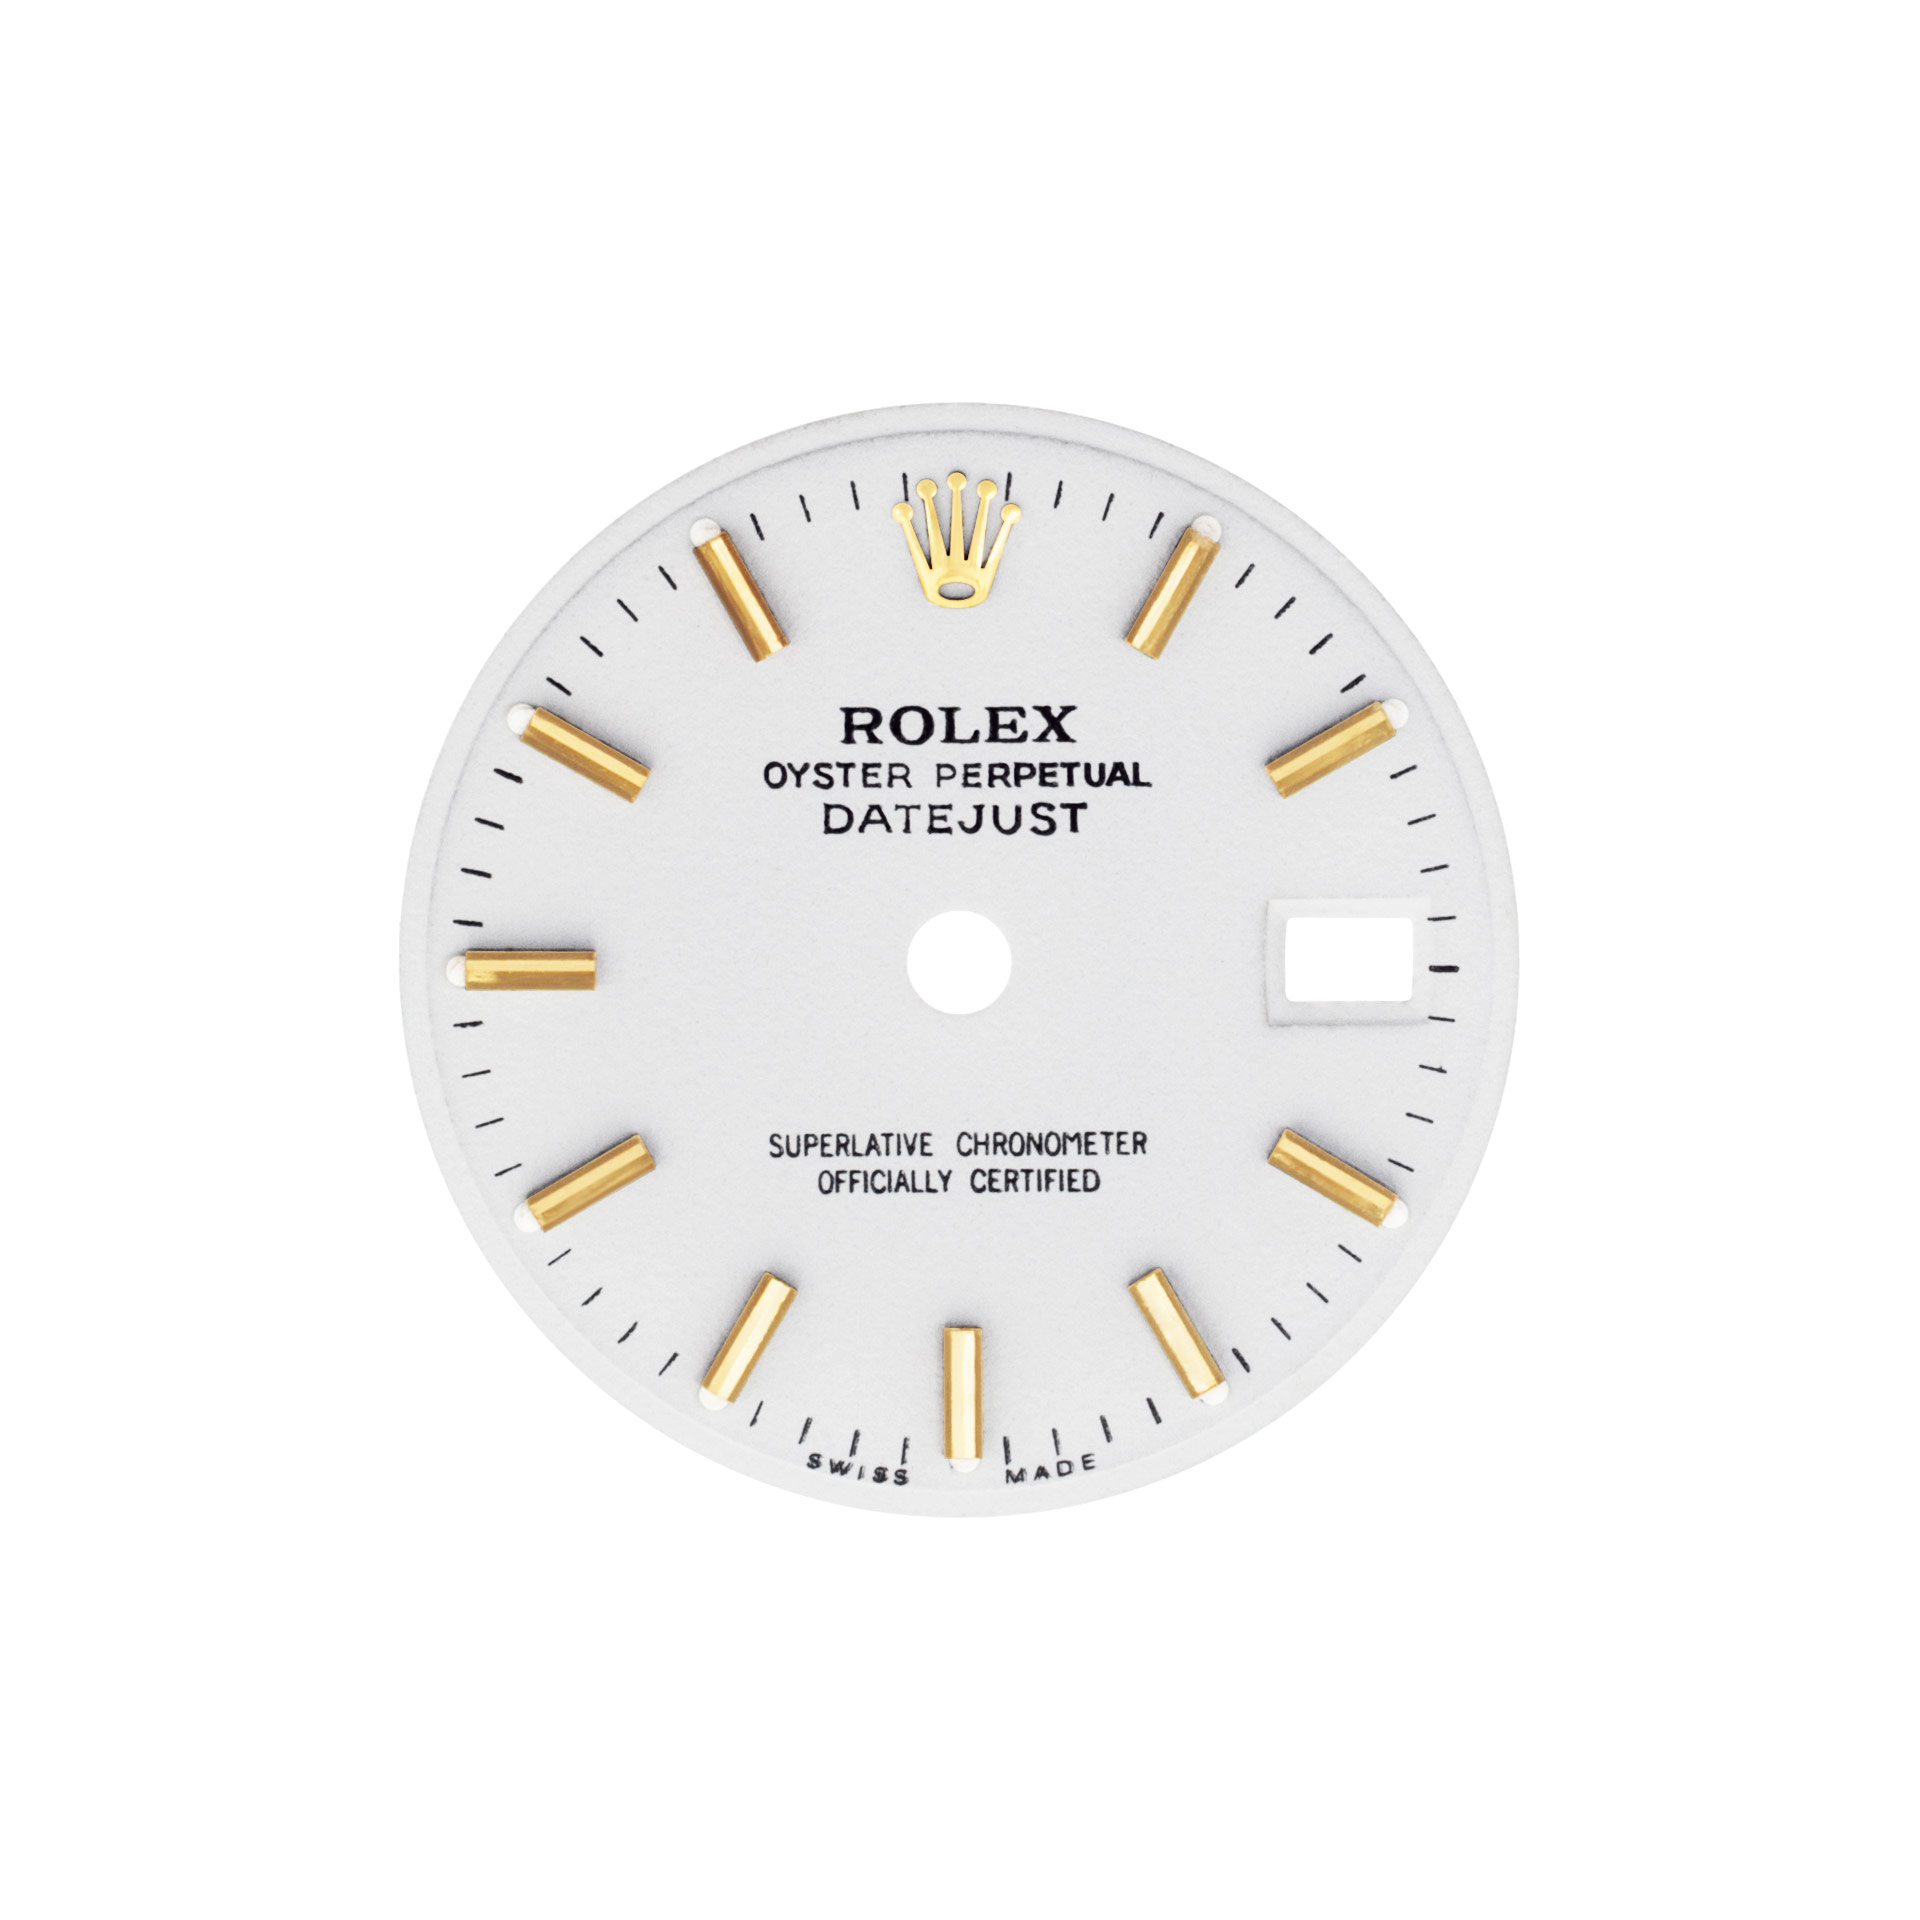 Rolex Datejust (20mm) white dial with golden stick hour markers.